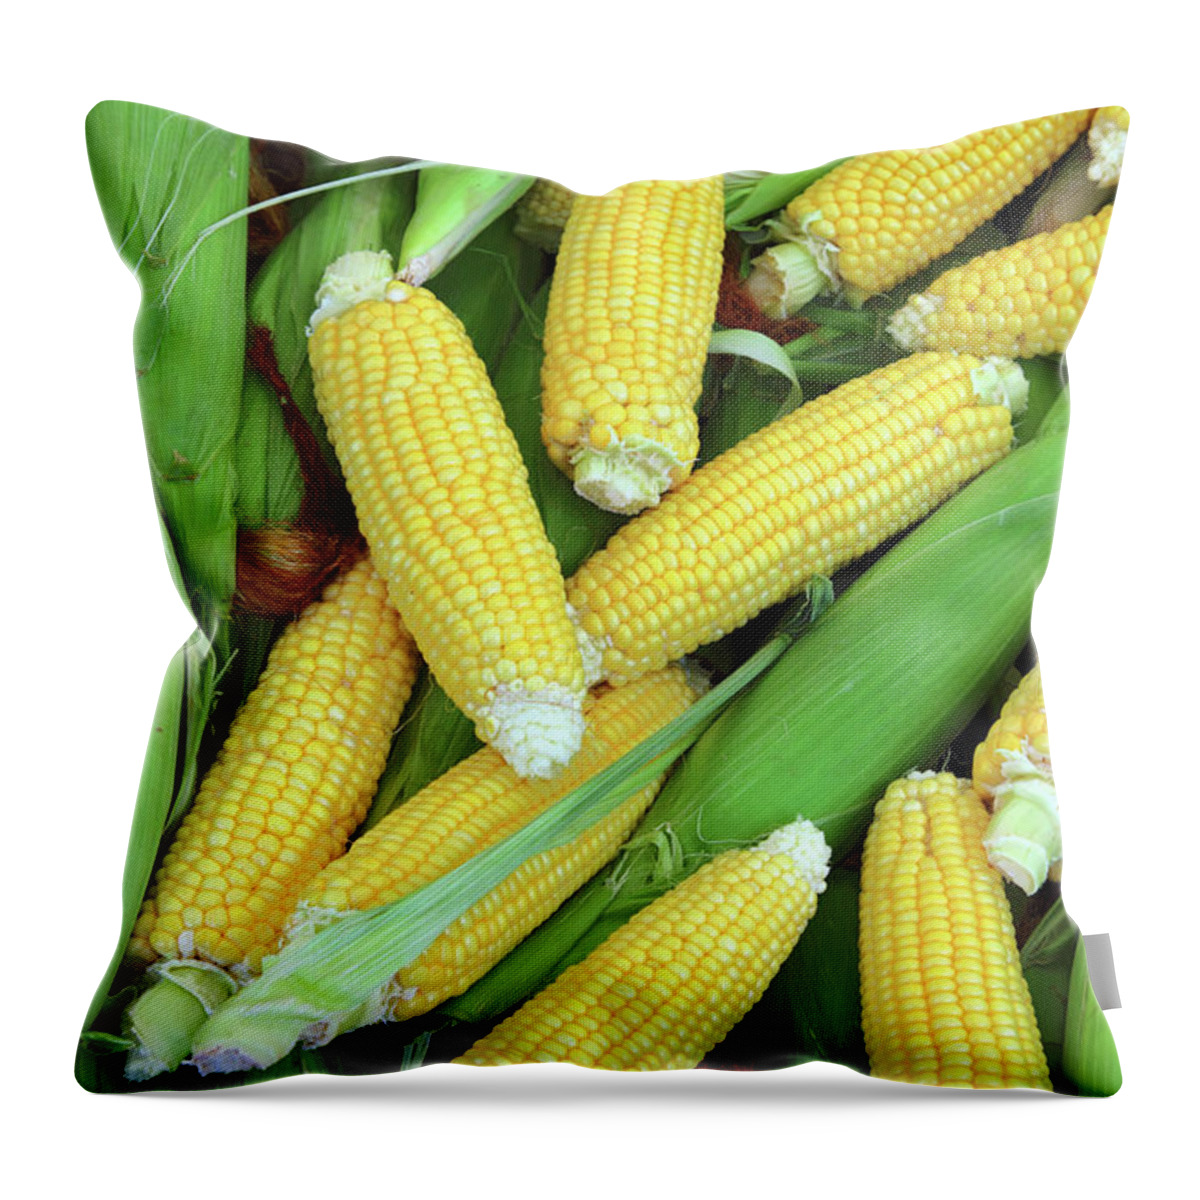 Corn Throw Pillow featuring the photograph Ripe Corn - Food Background by Mikhail Kokhanchikov